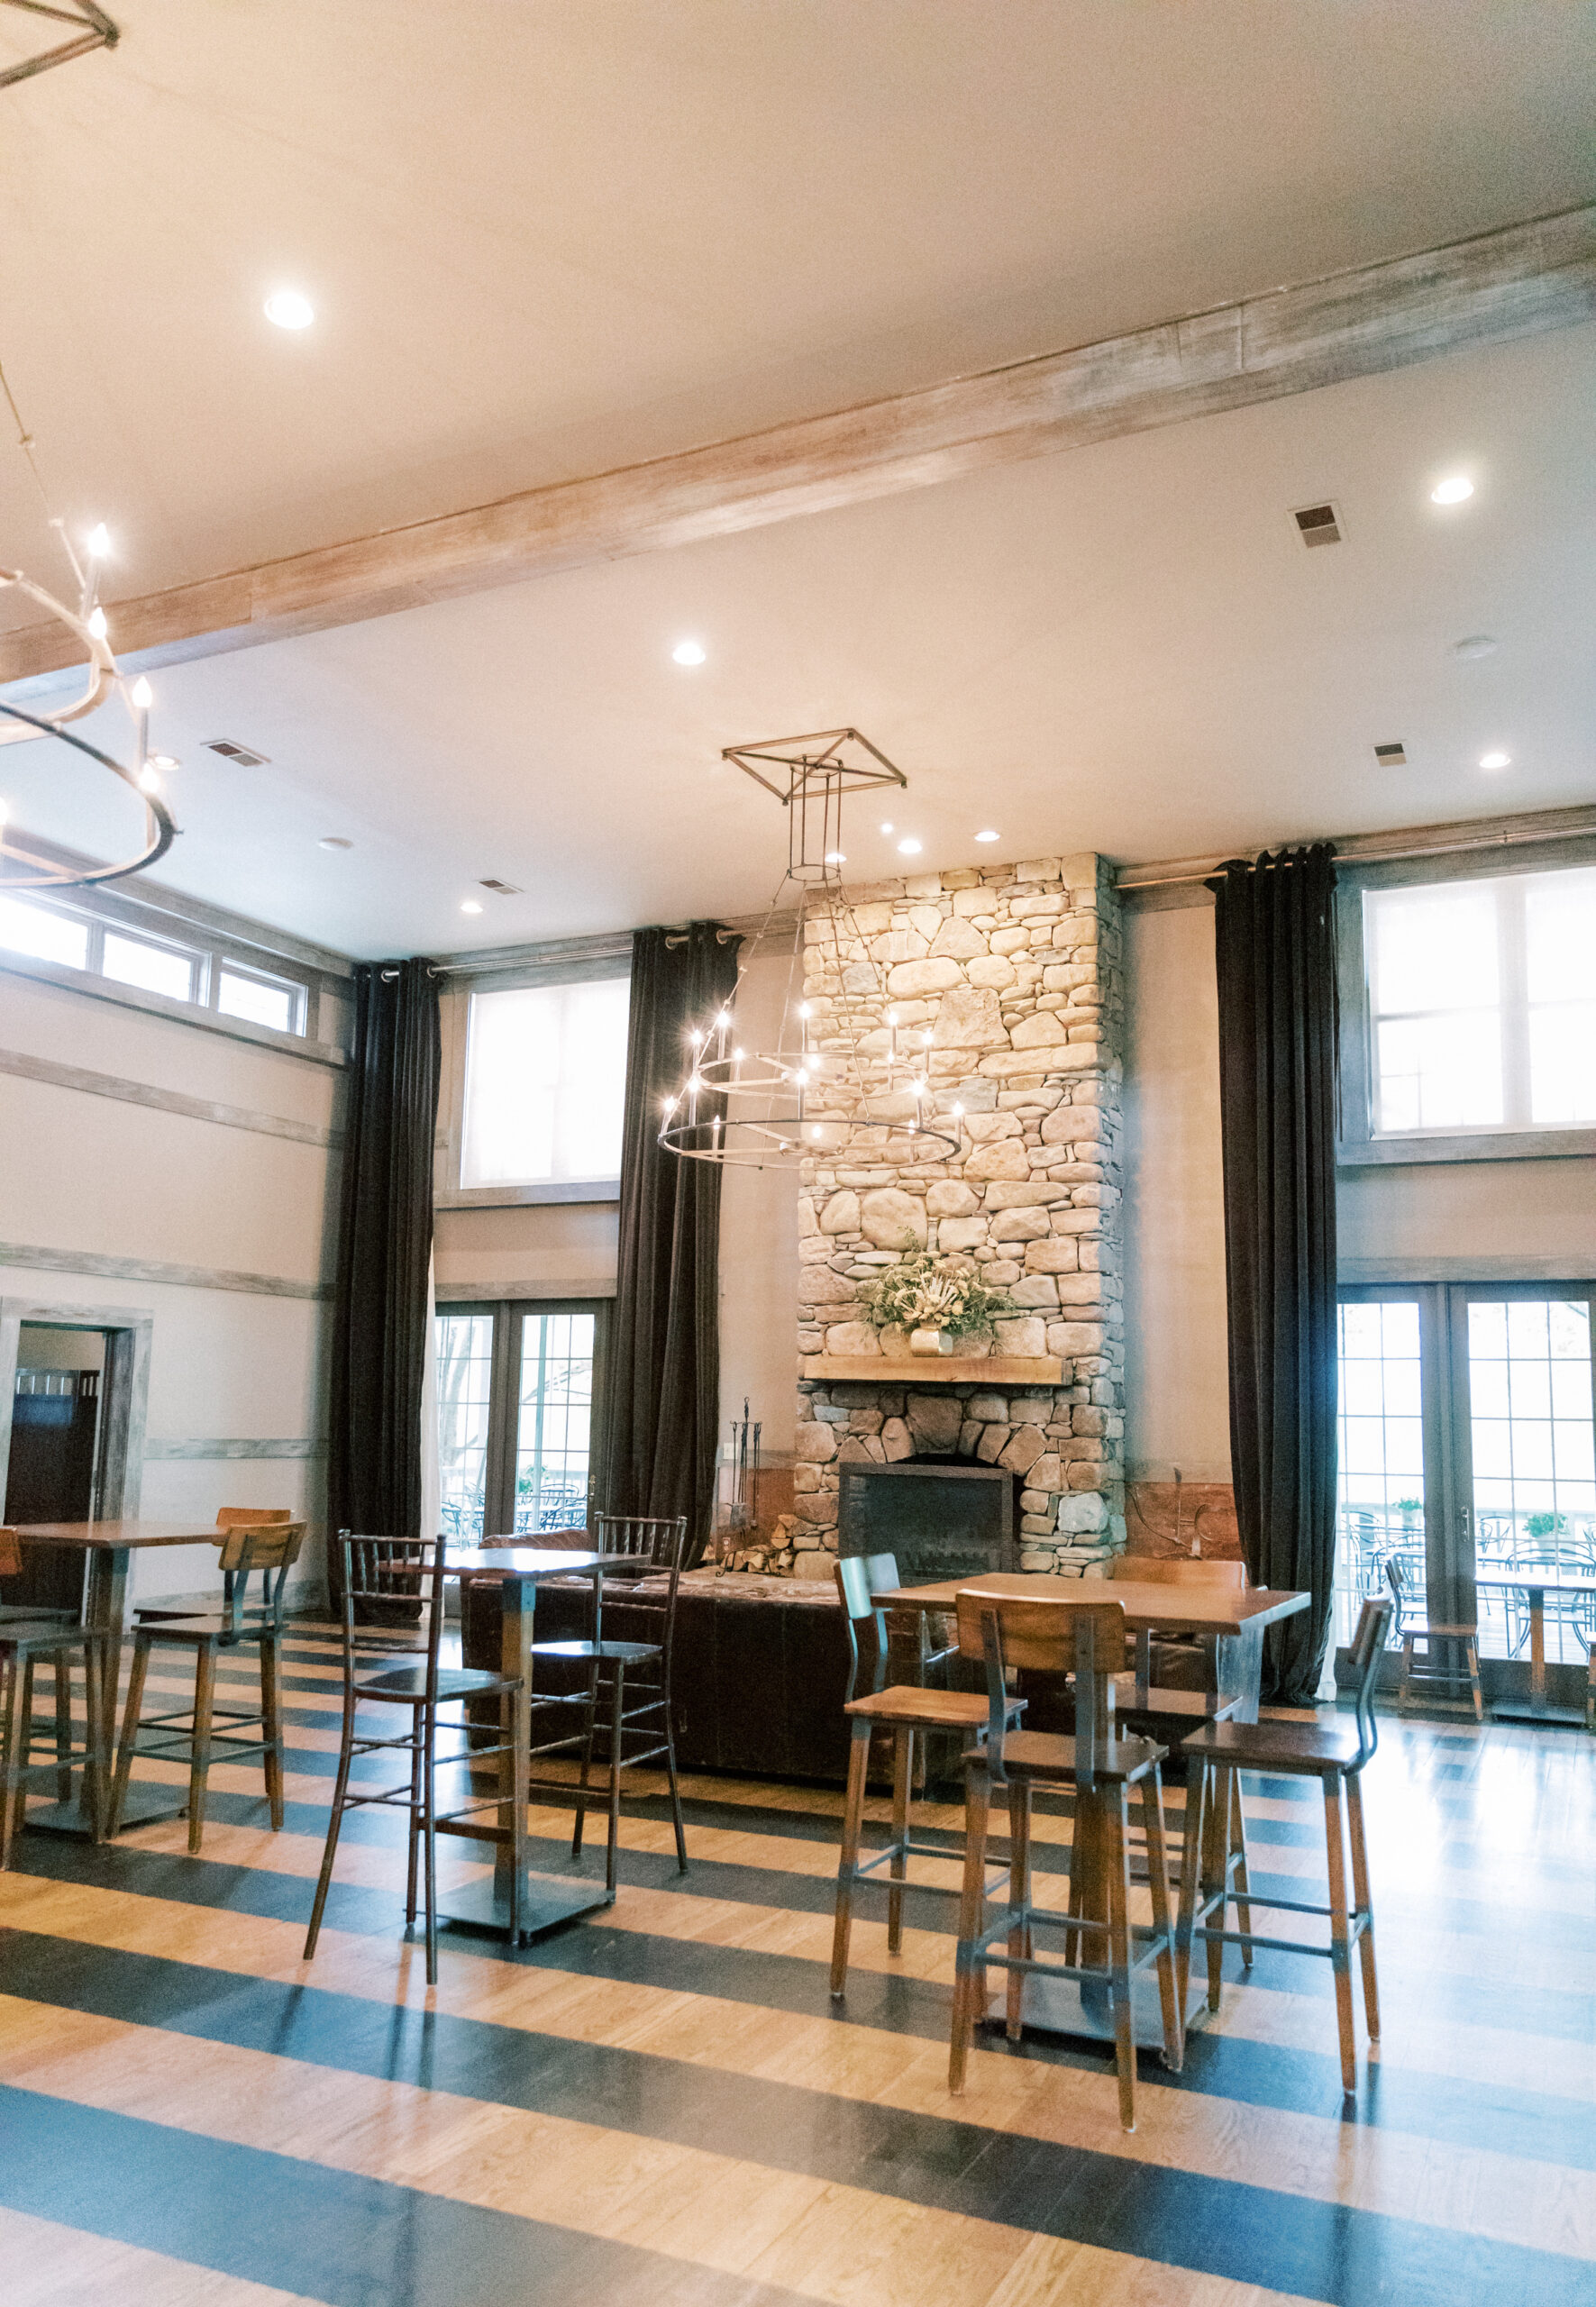 Inside the tasting room there is a lovely fireplace and a large bar for guests to get drinks